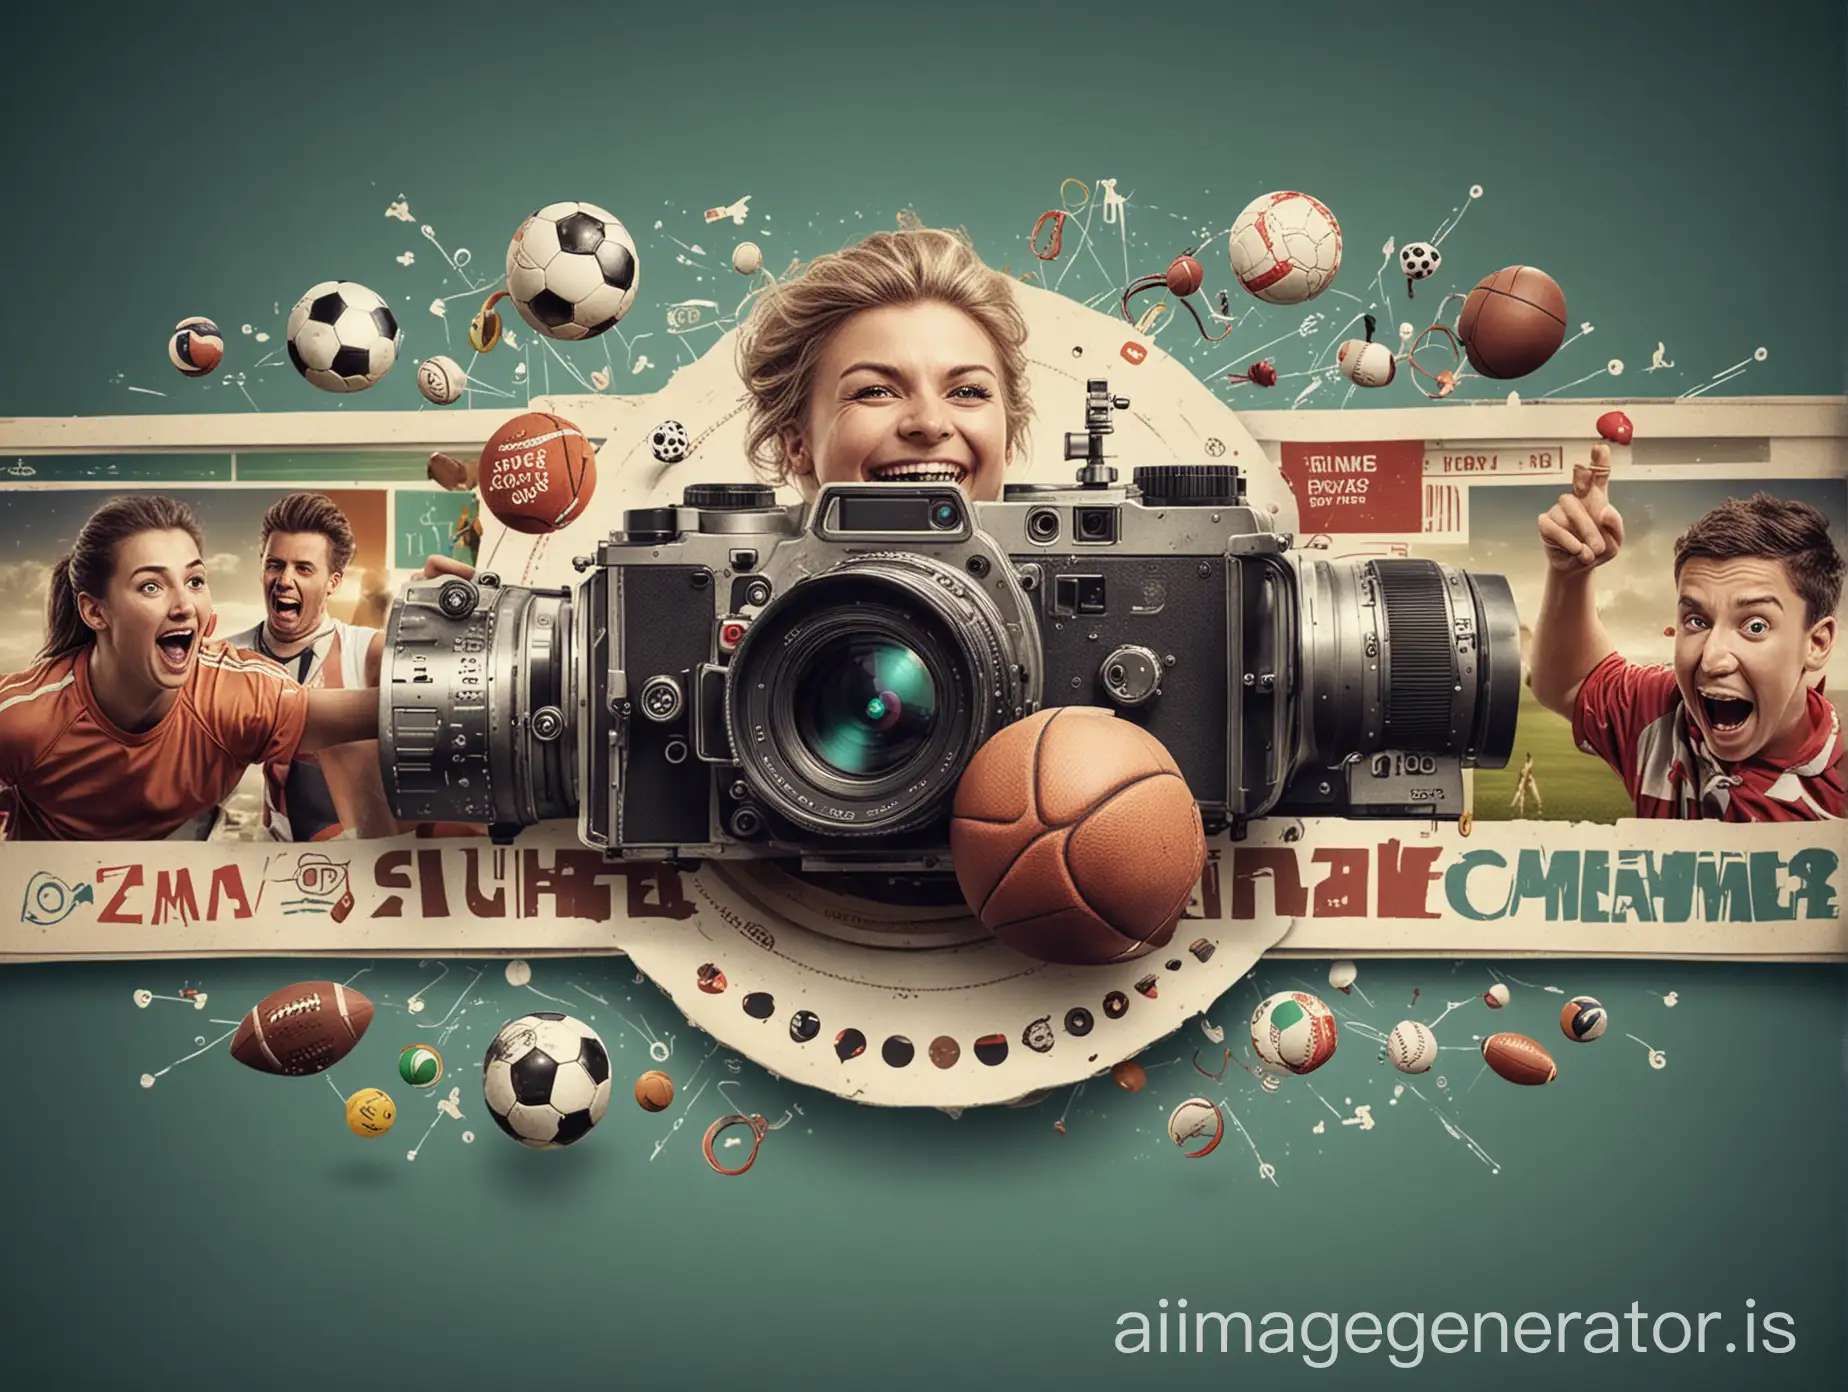 Dynamic-Fusion-of-Sports-Laughter-Cinema-and-Science-in-a-Vibrant-Advertising-Banner